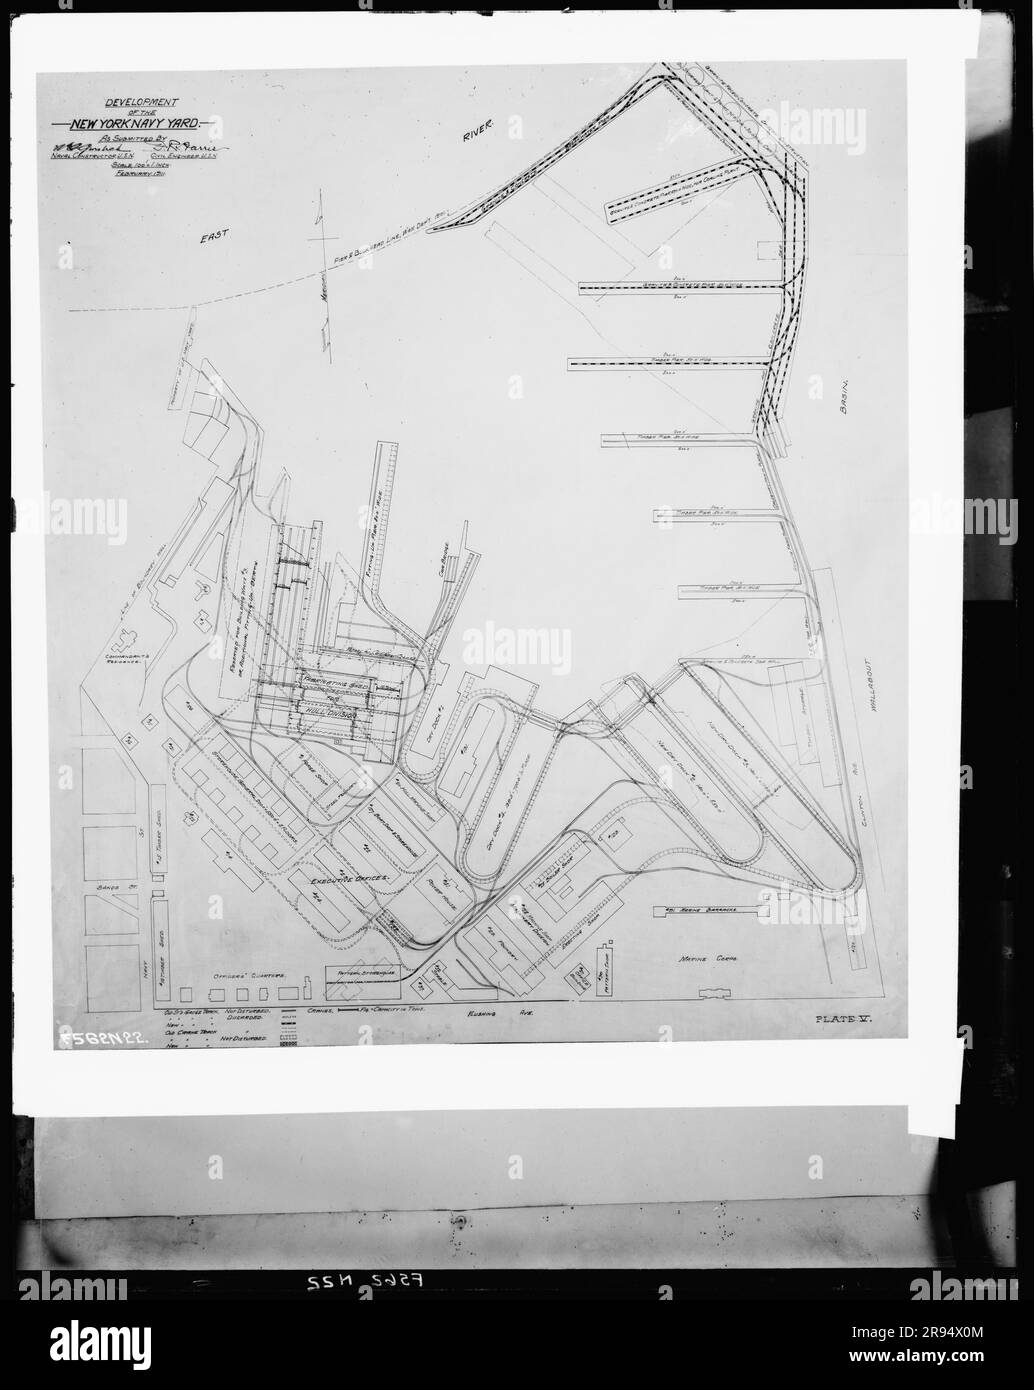 Development Drawing, Plate V - Site Plan. Glass Plate Negatives of the Construction and Repair of Buildings, Facilities, and Vessels at the New York Navy Yard. Stock Photo